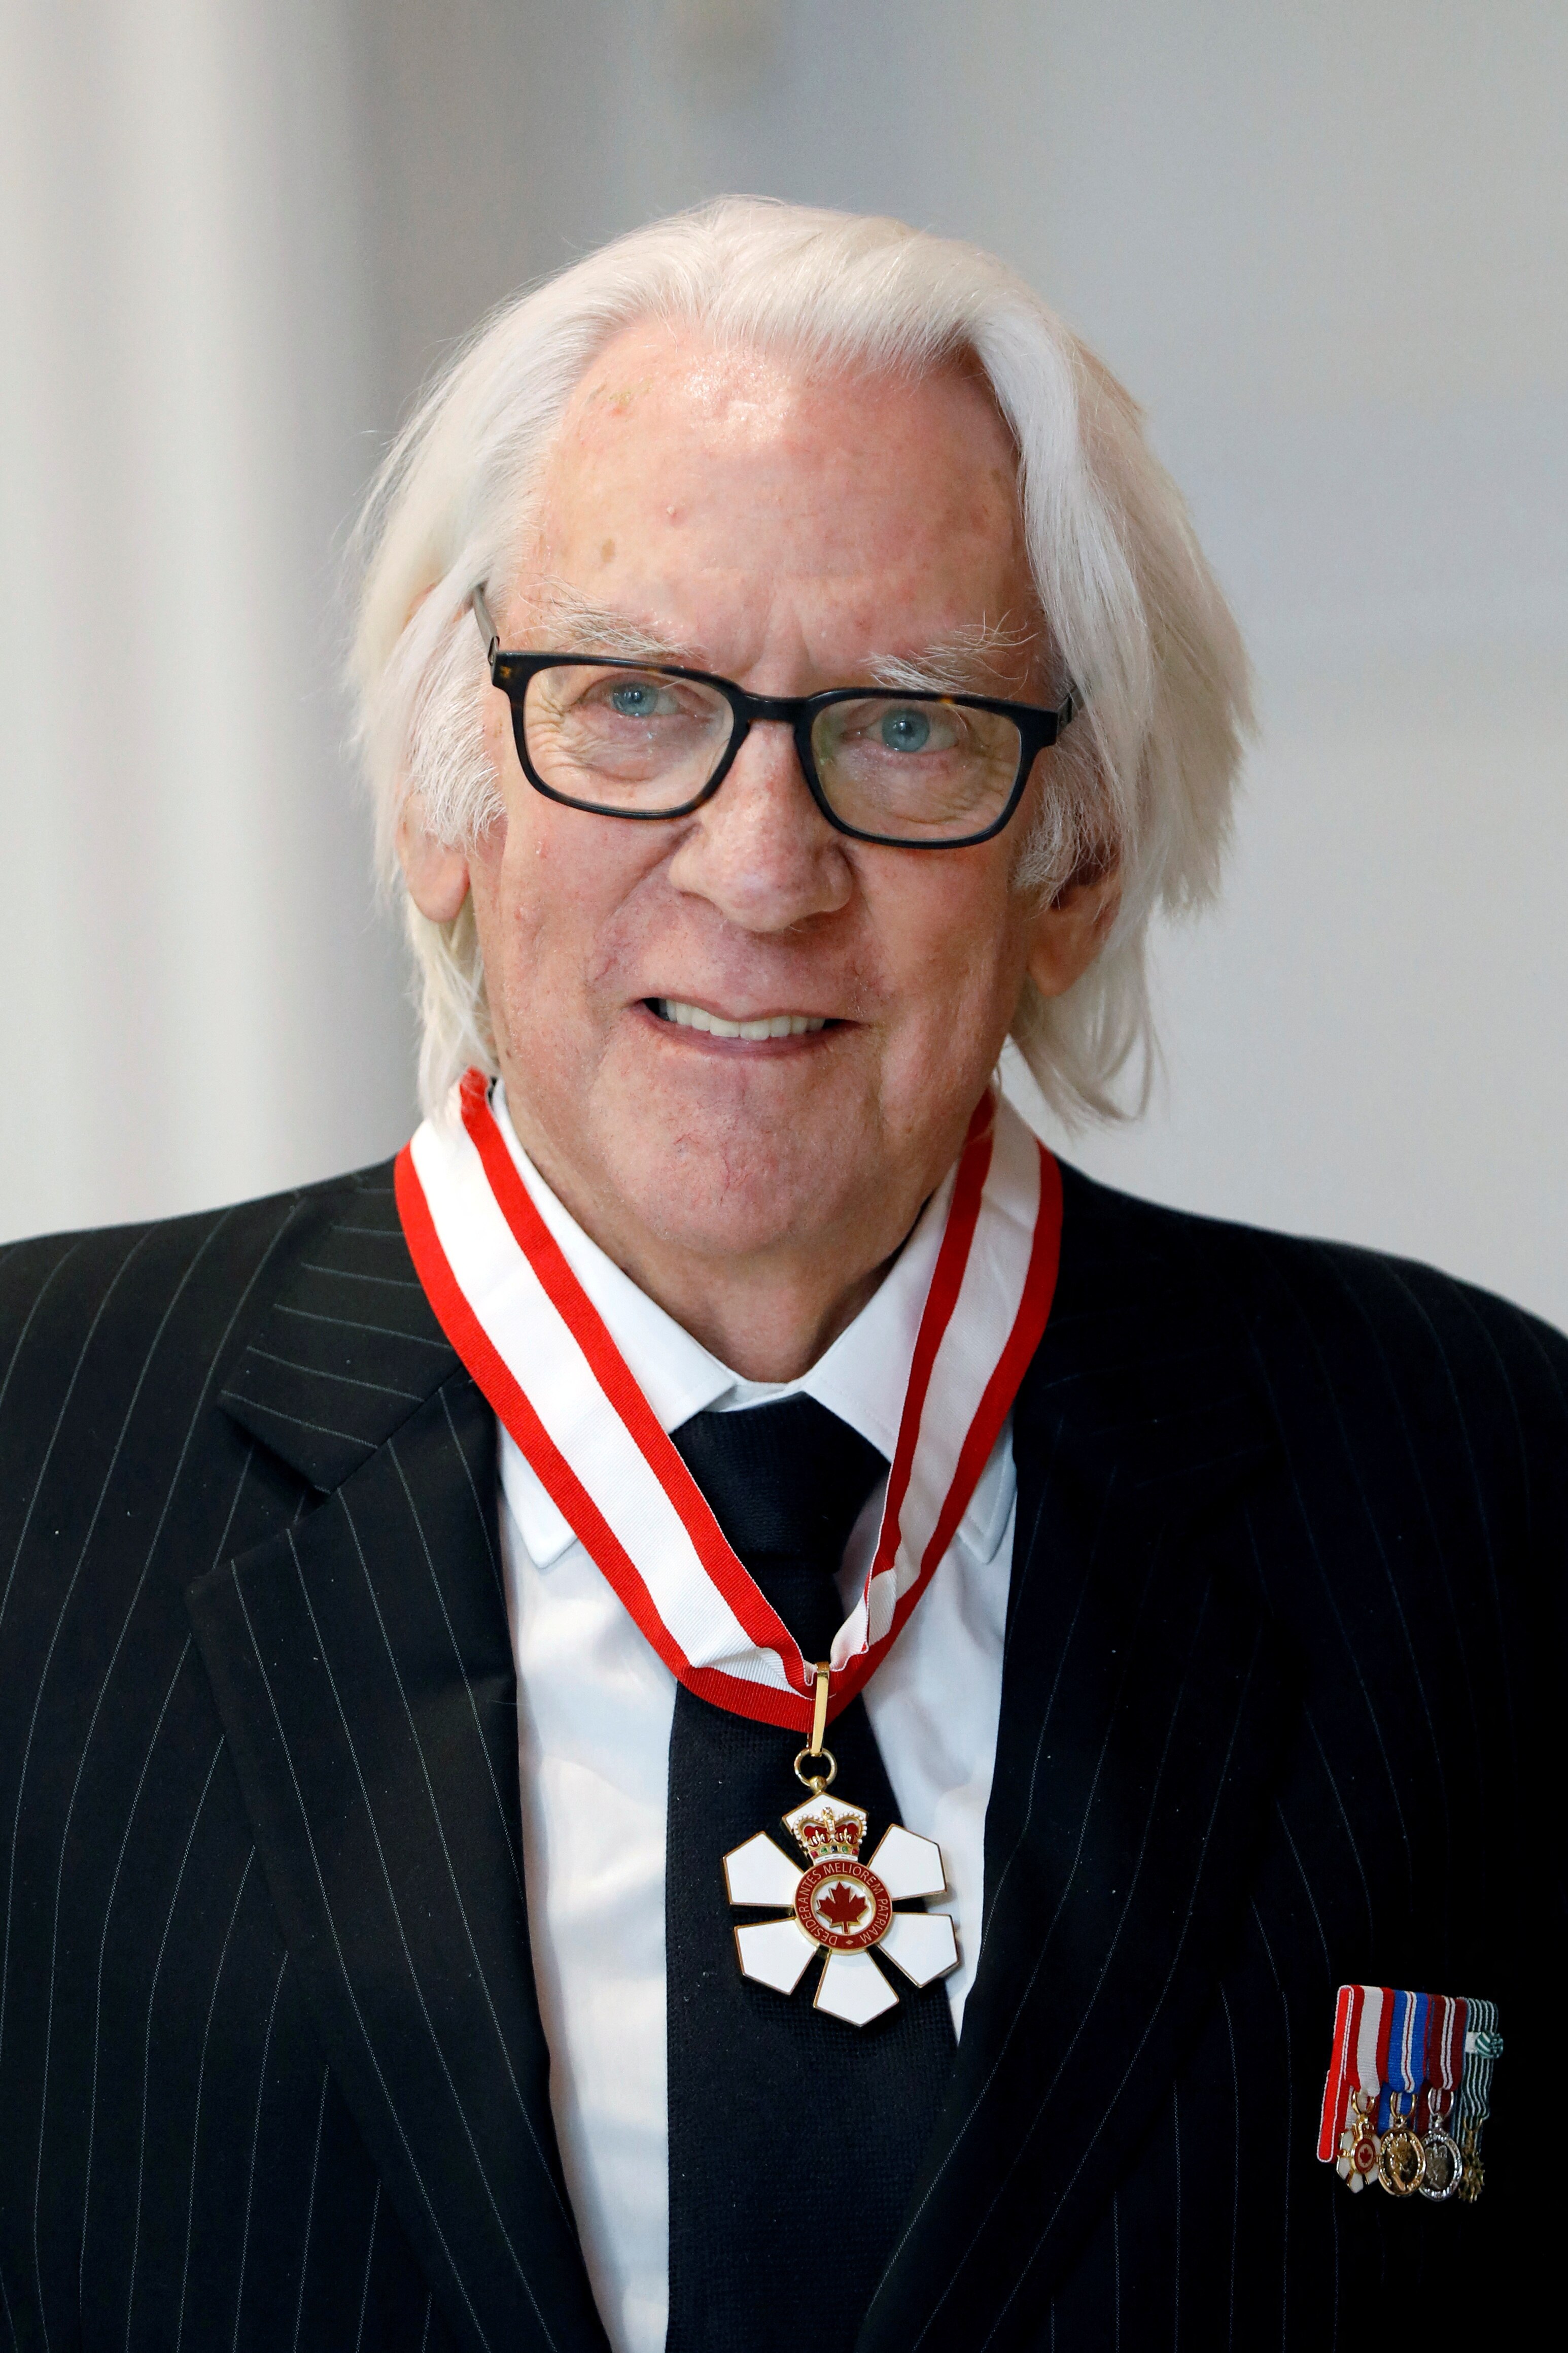 Donald Sutherland smiling for the camera with a medal around his neck